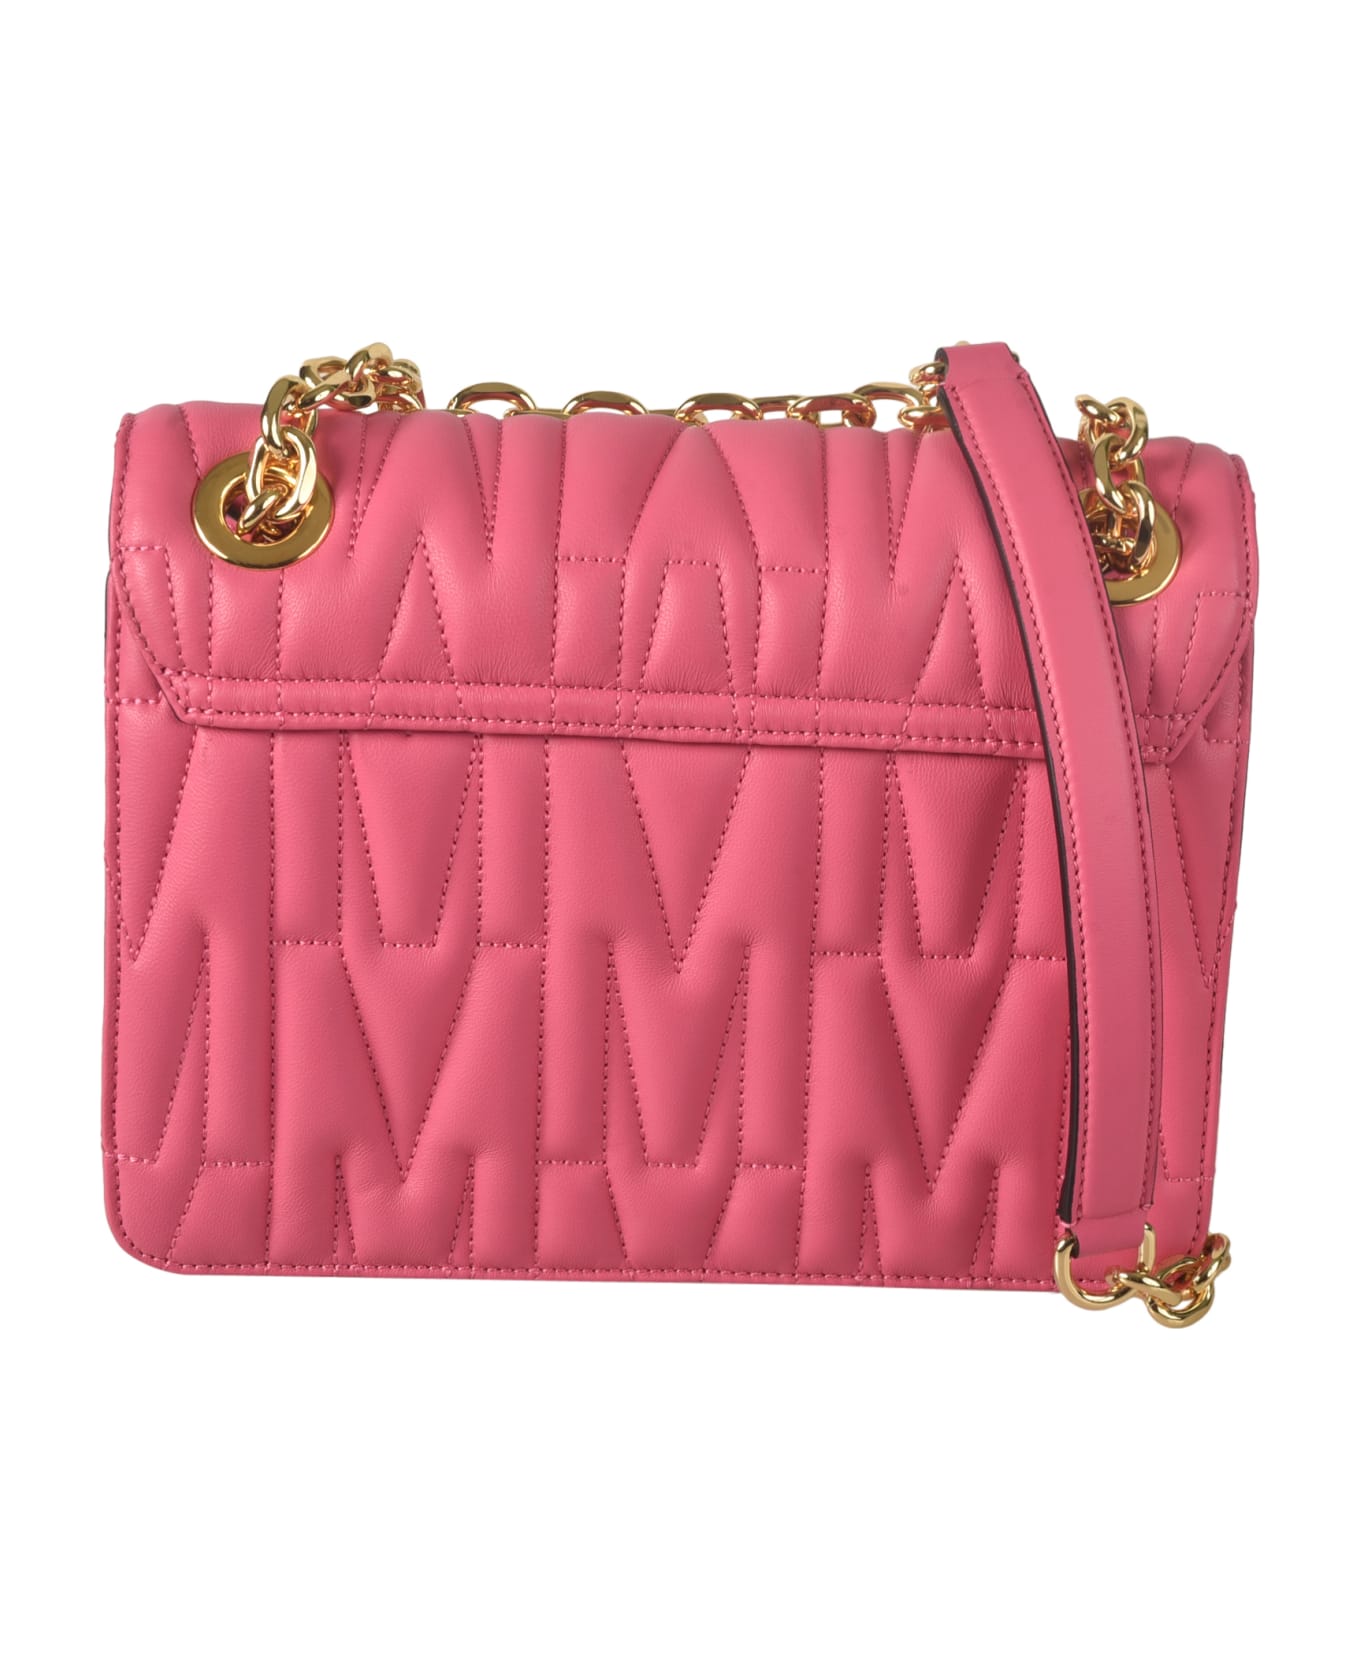 Moschino Logo Quilted Chain Shoulder Bag - 0199 ショルダーバッグ